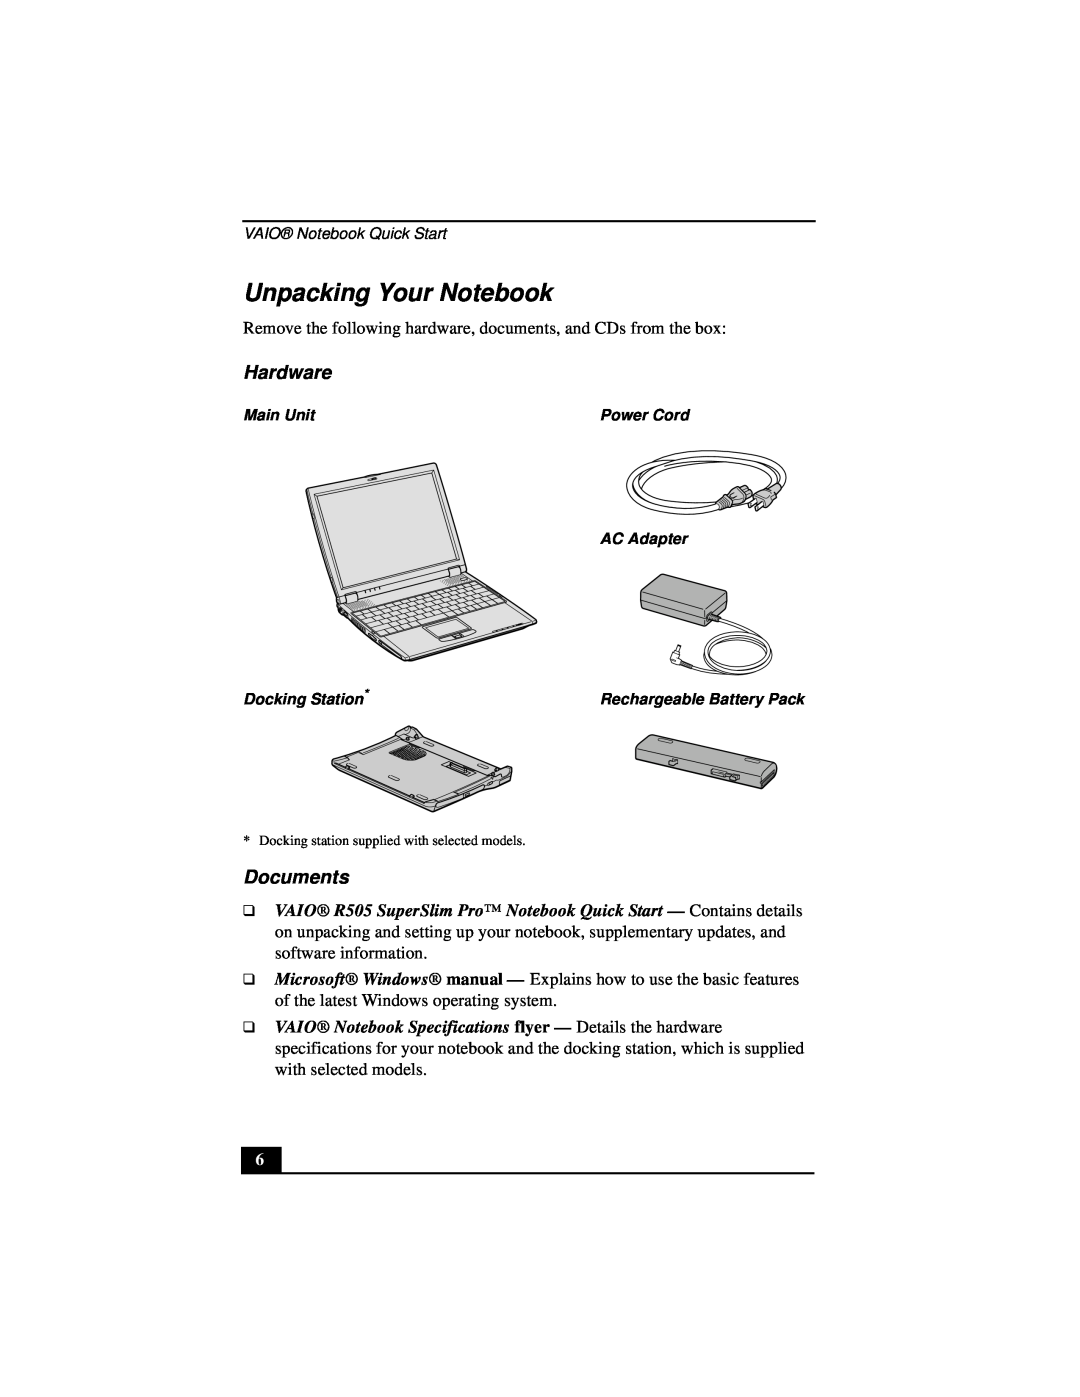 Sony PCG-R505DSK, PCG-R505DL, PCG-R505DSP service manual Unpacking Your Notebook, Hardware, Documents 